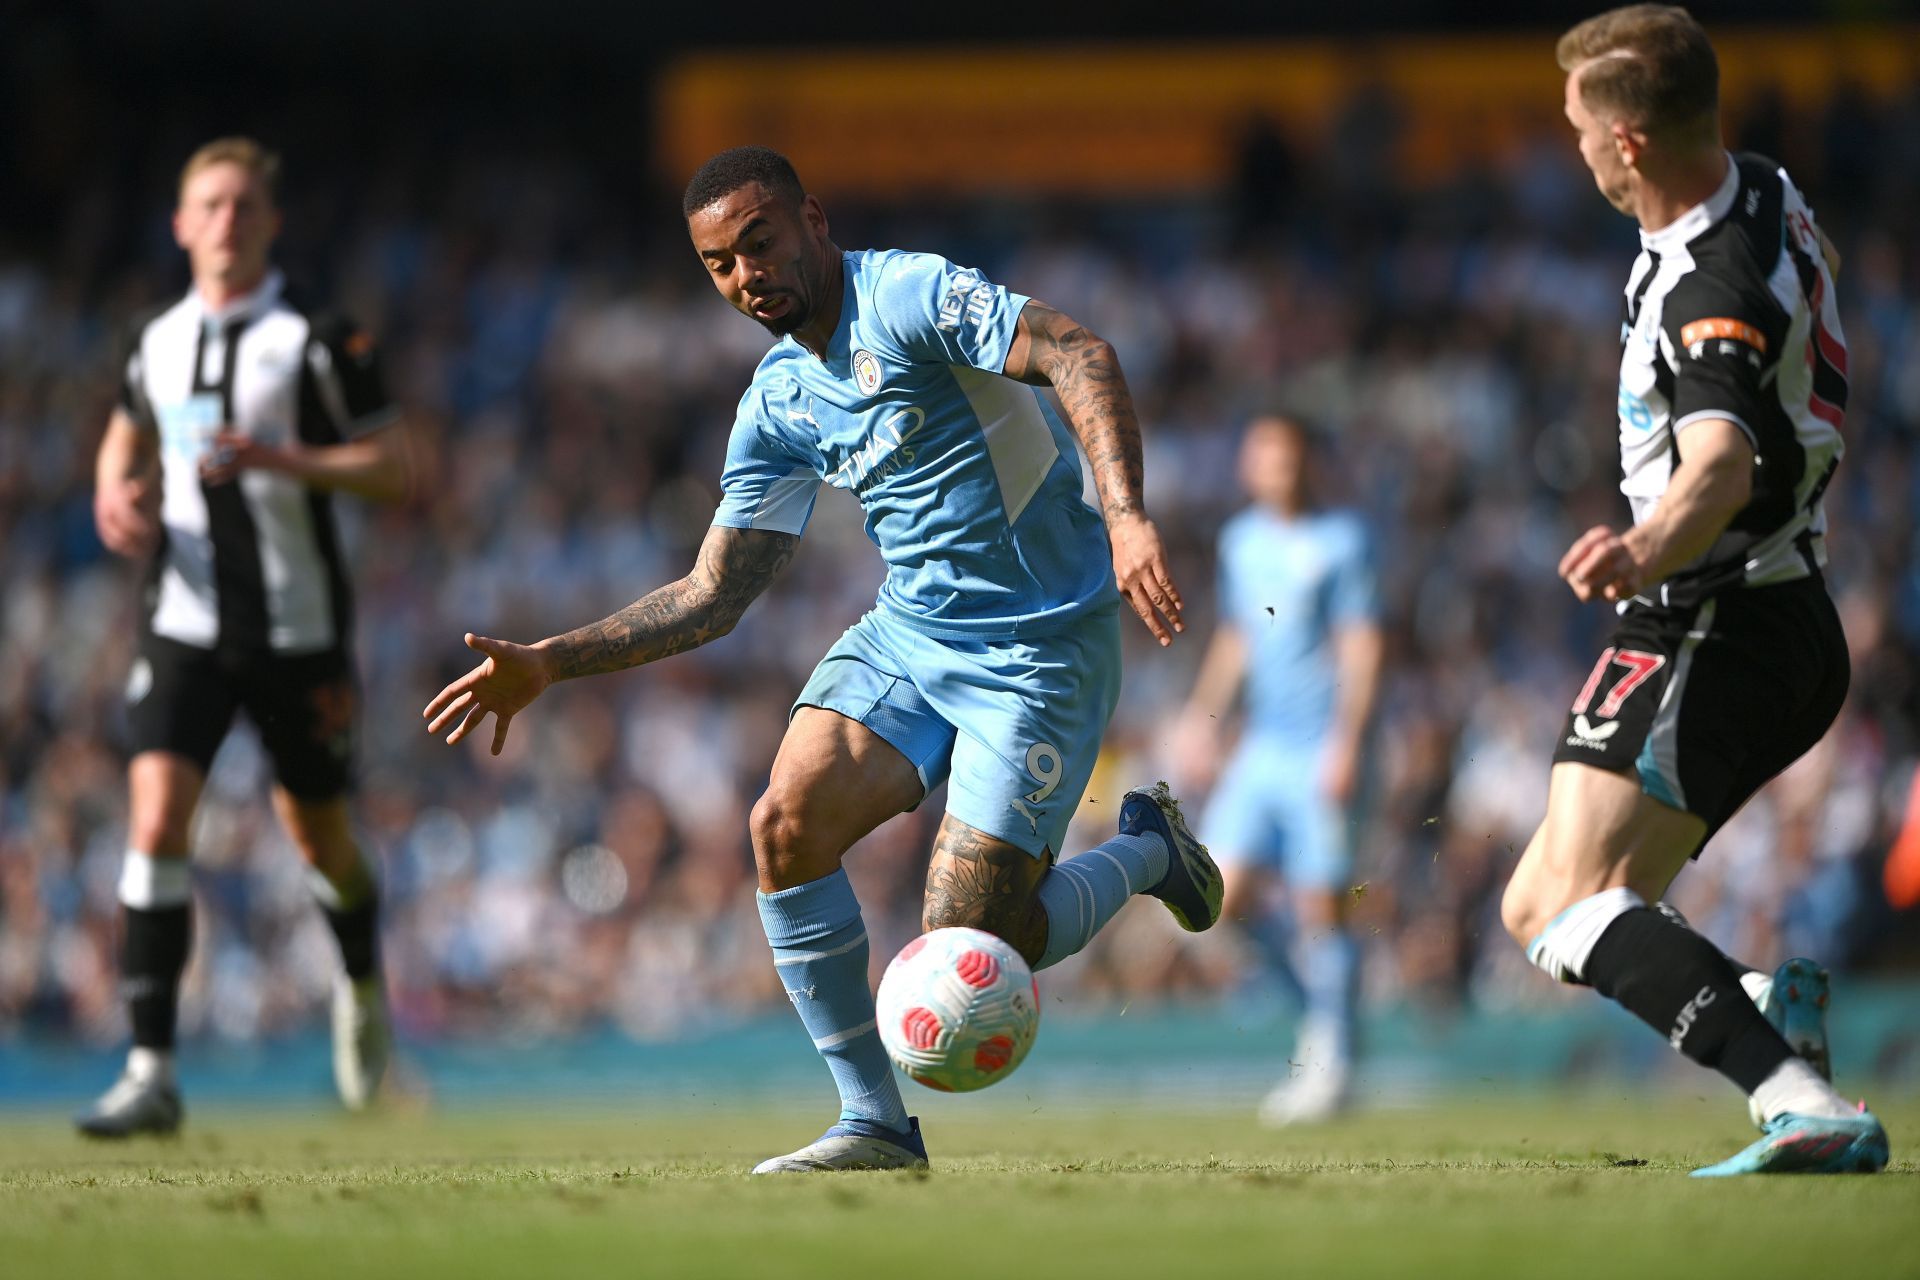 Jesus in action for Manchester City